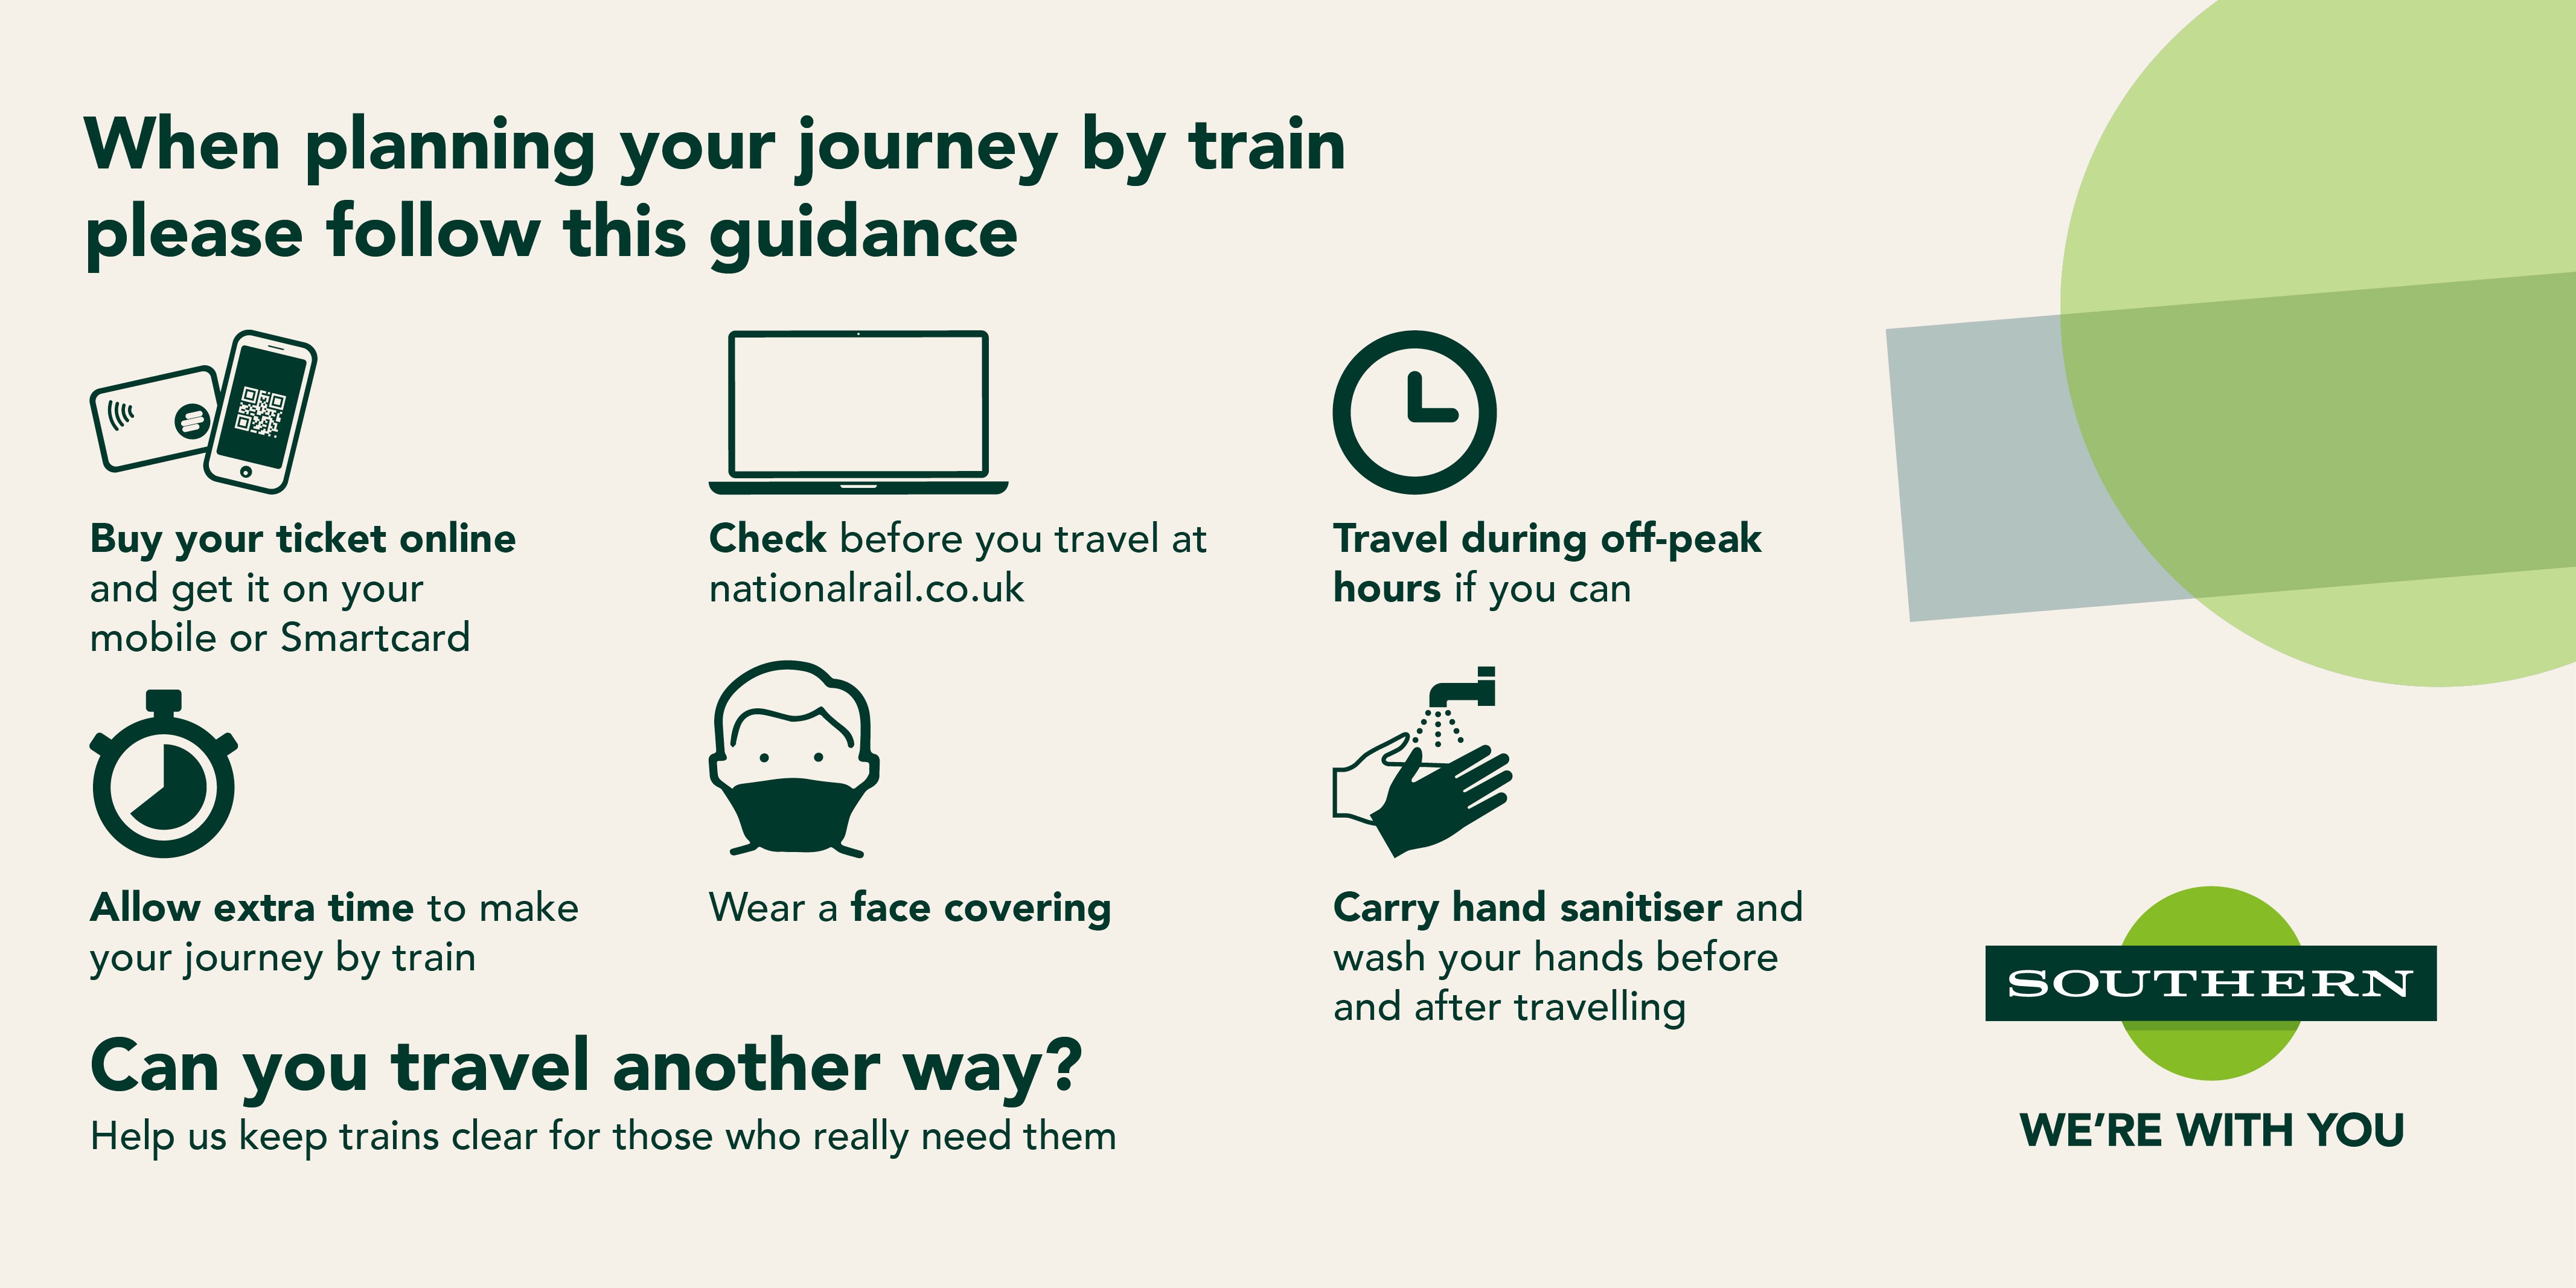 When planning your journey by train please follow this guidance